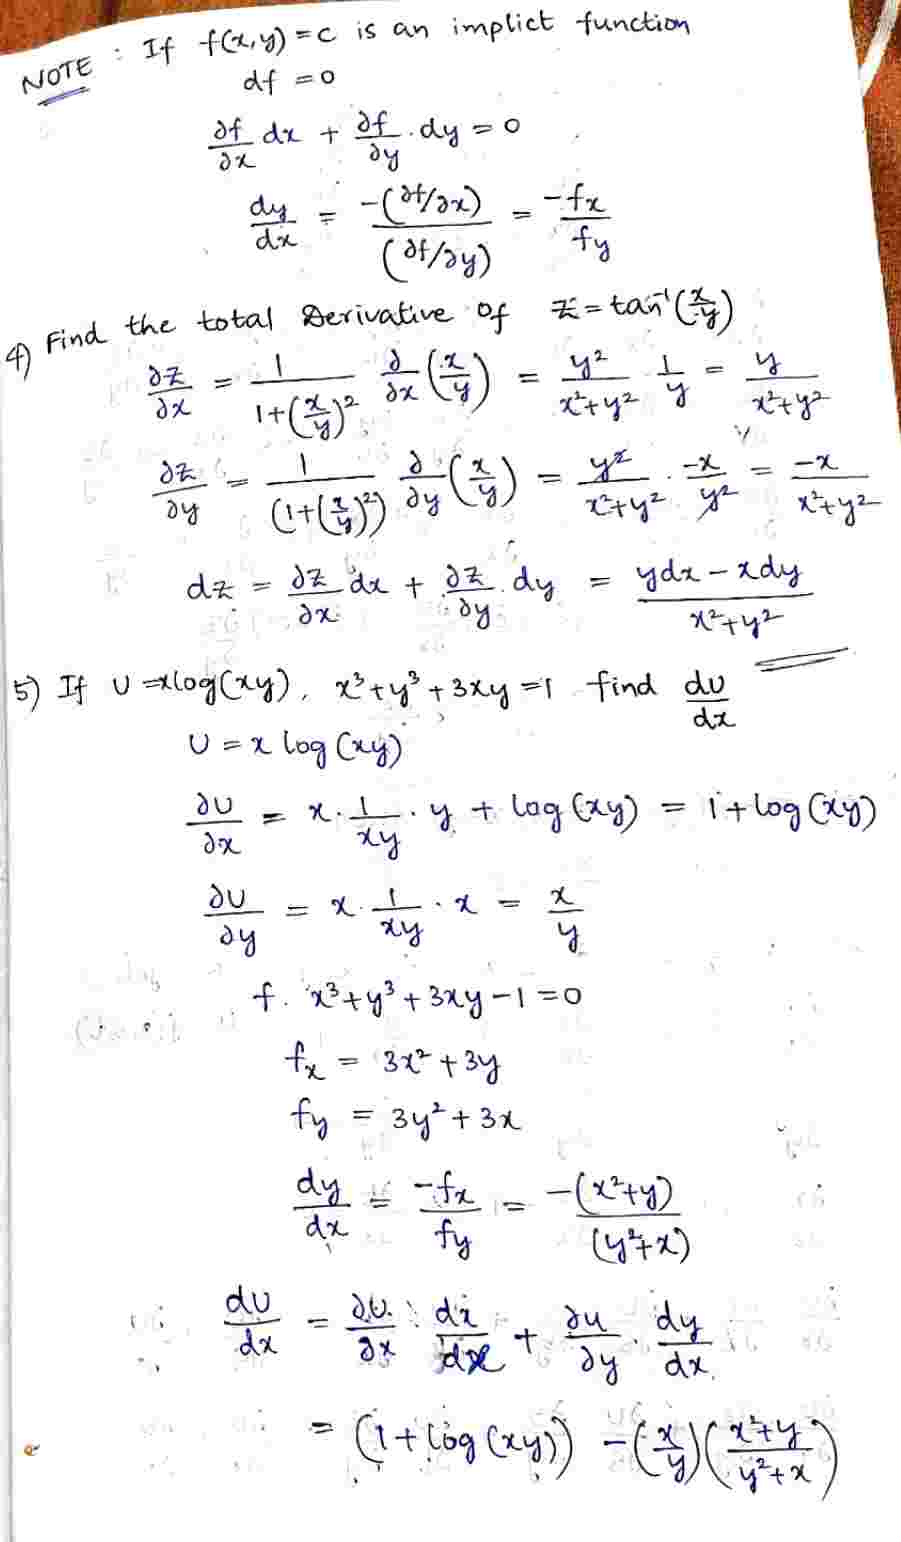 Chain_Rule_of_Partial_Differentiation